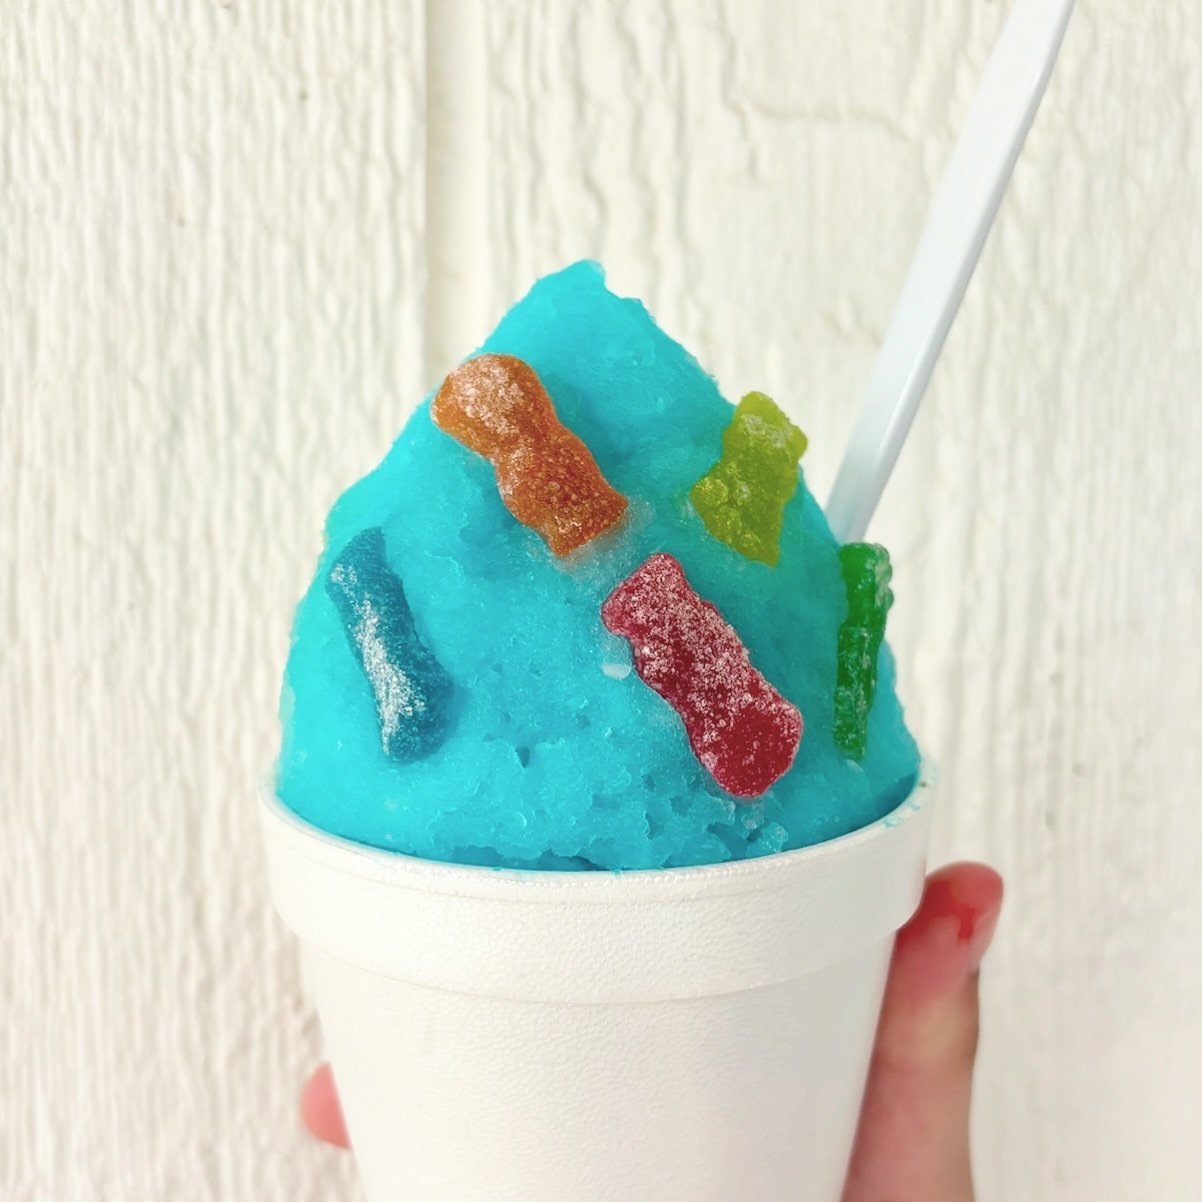 The ice is just too perfect🥲 

This is the epitome of 𝓈𝒽𝒶𝓋ℯ𝒹 ice VS a snow cone&hellip;&hellip; 

POLAR PUNCH + SOUR PATCH KIDS

⏰OPEN 12-8 everyday 
📍Manvel, TX 
🚘Drive-Thru 

#manvel #manveltx #shavedice #weekleys #weekleysshavedice #snowco